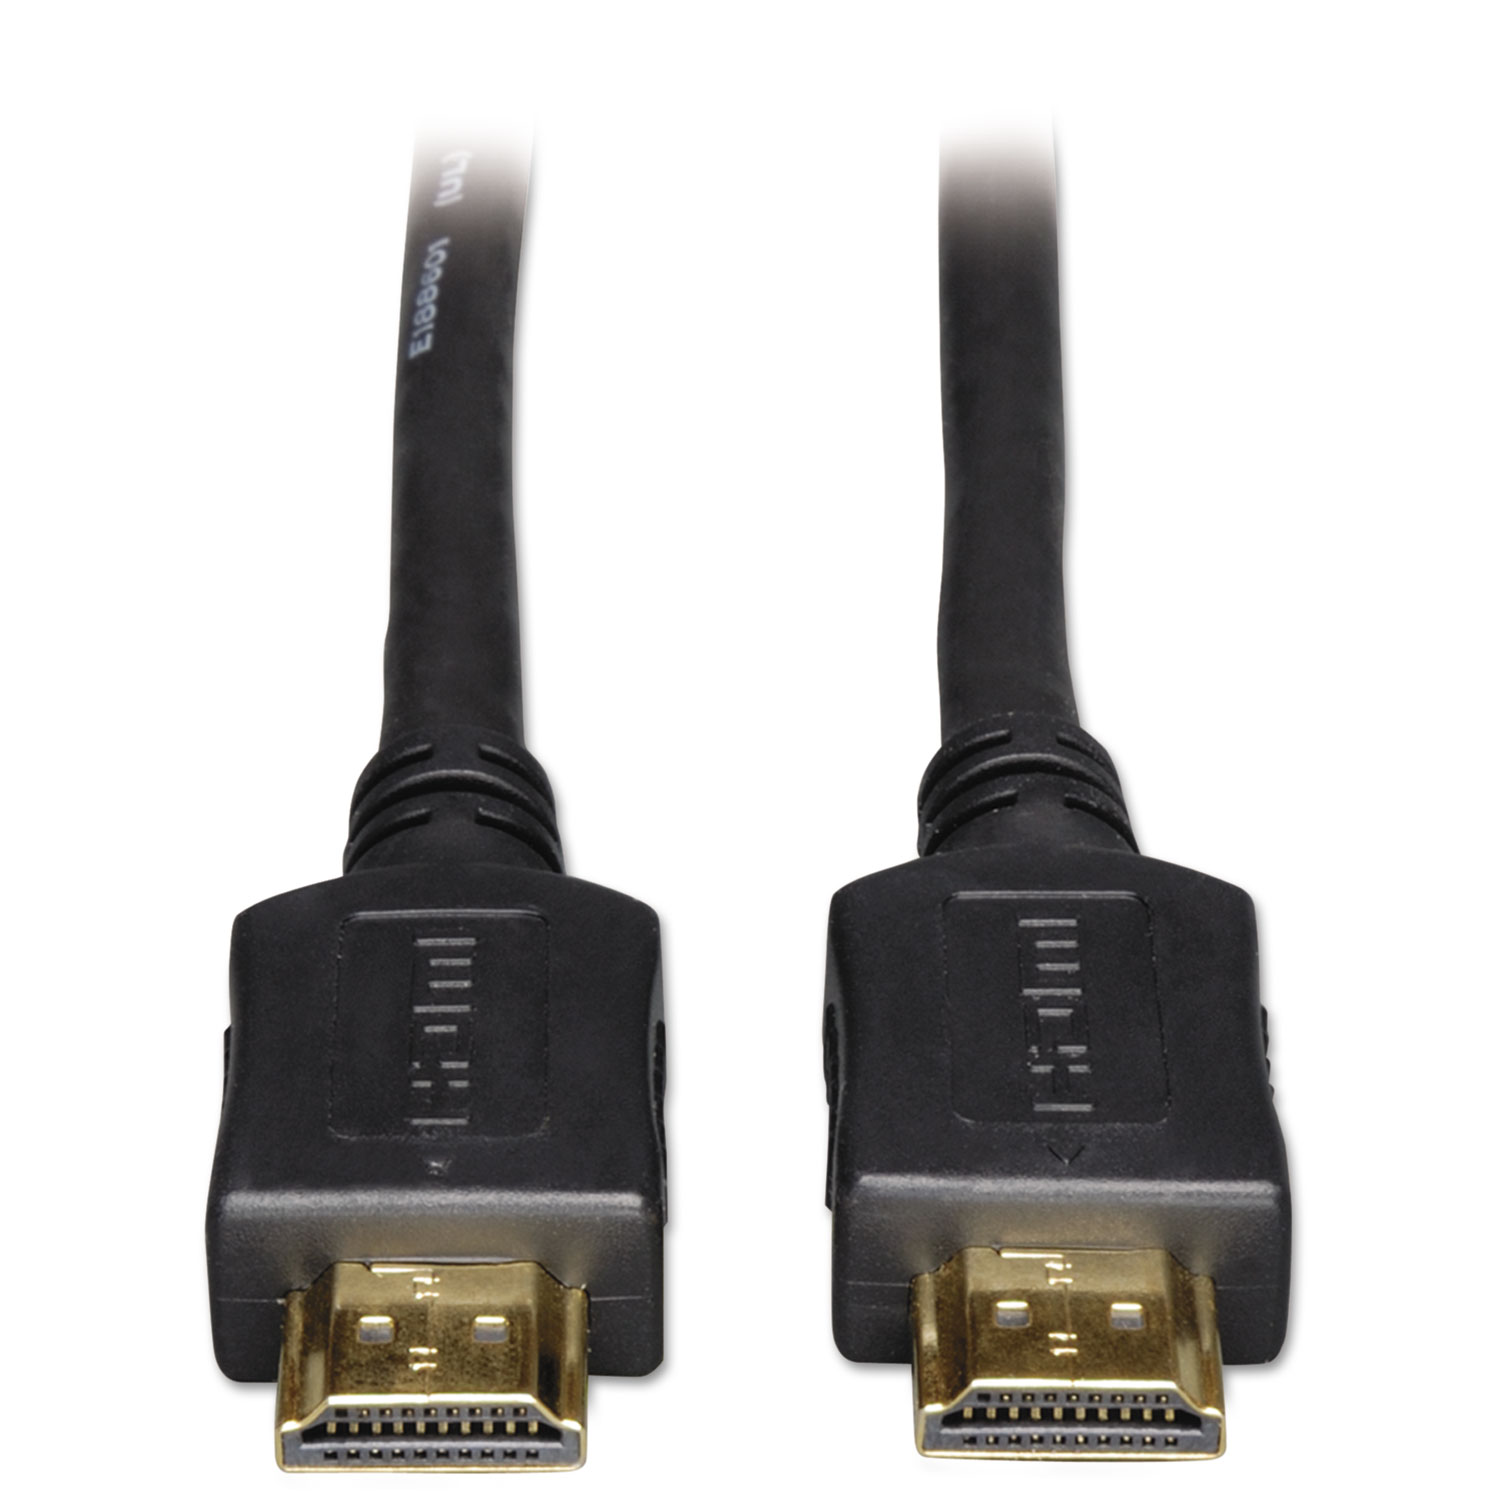  Tripp Lite P568-003 High Speed HDMI Cable, Ultra HD 4K x 2K, Digital Video with Audio (M/M), 3 ft. (TRPP568003) 